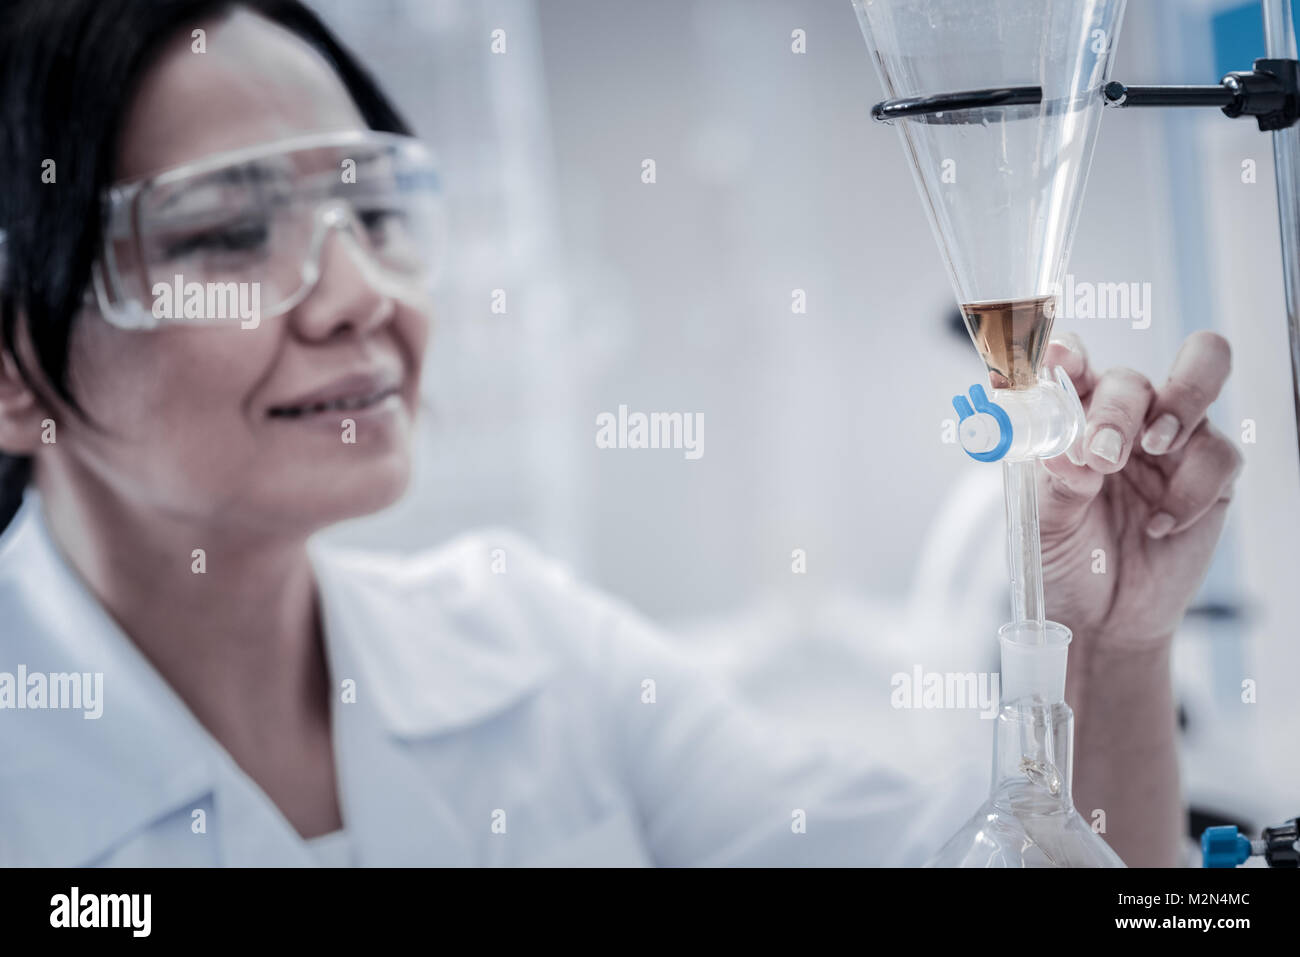 Cheerful scientist regulating lab glassware fixed on metal stand Stock Photo